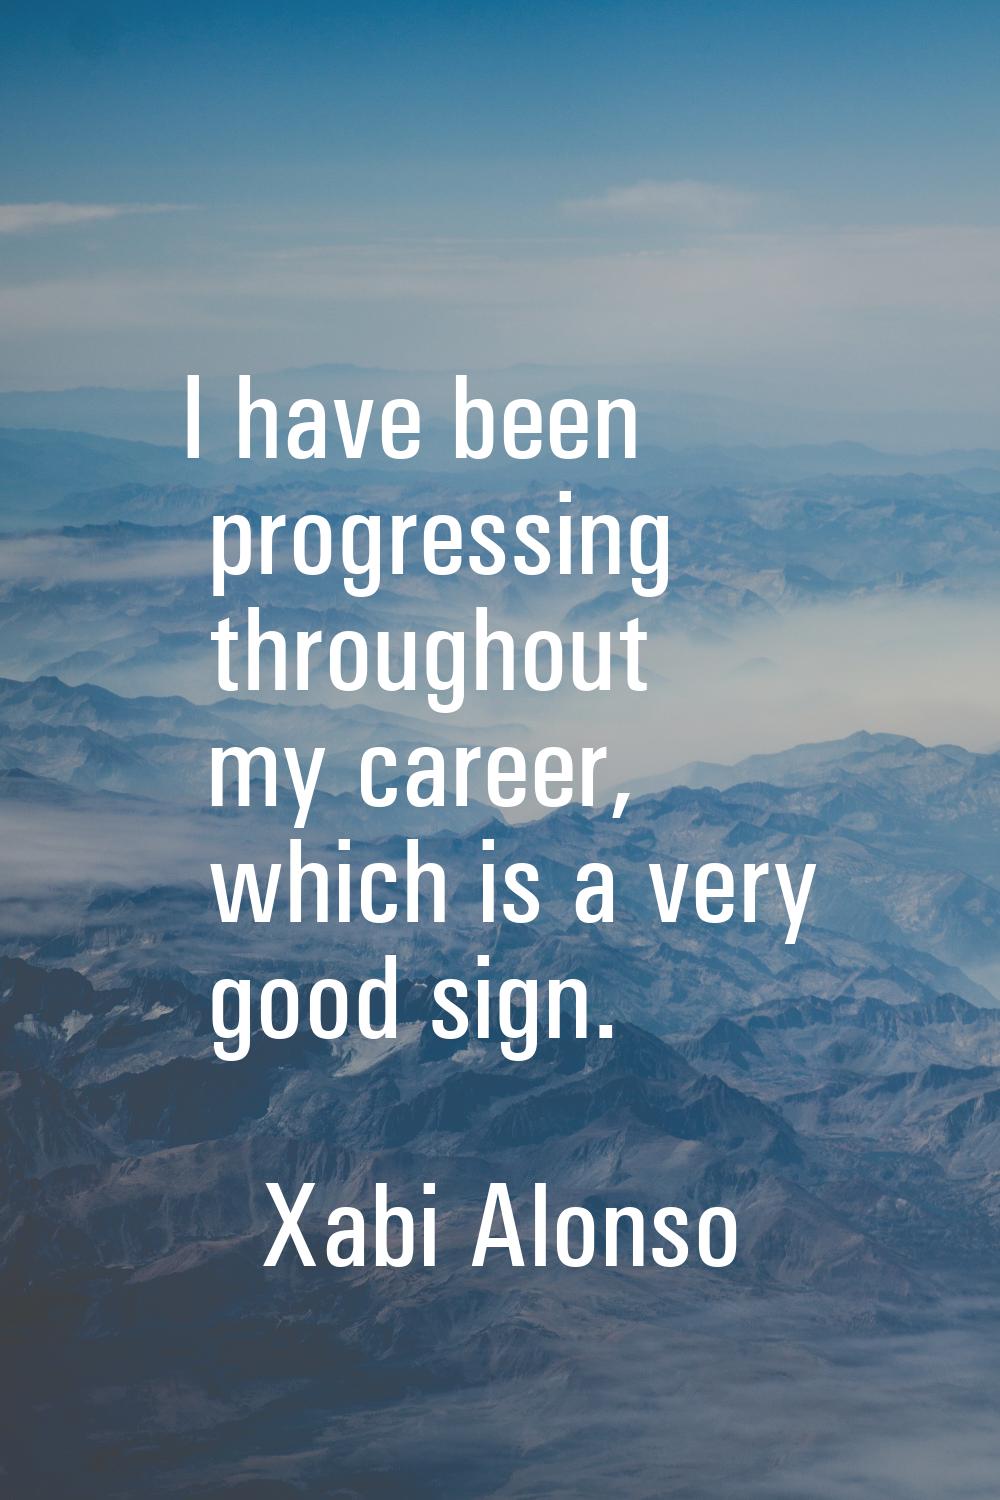 I have been progressing throughout my career, which is a very good sign.